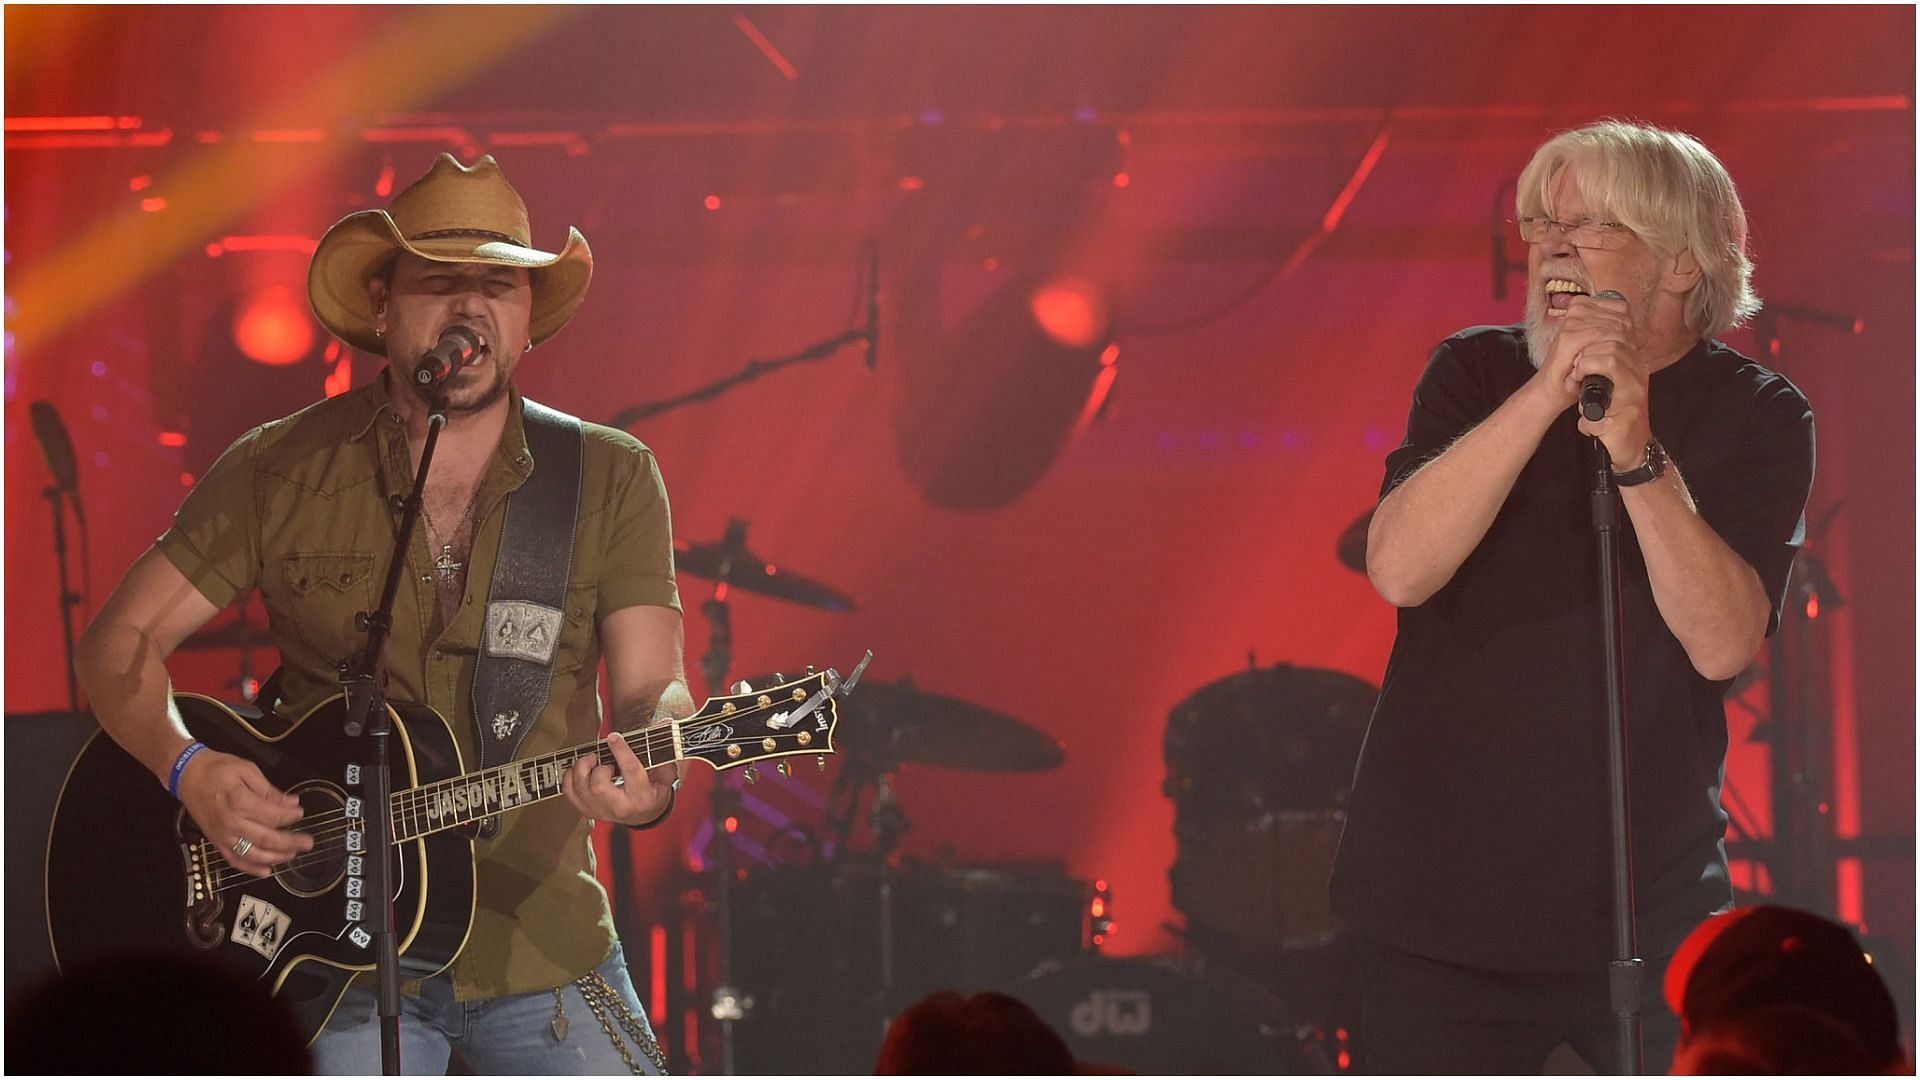 Jason Aldean and Bob Seger perform during the taping of CMT Crossroads: Bob Seger And Jason Aldean at The Factory on October 28, 2014, in Franklin, Tennessee (Image via Getty Images)